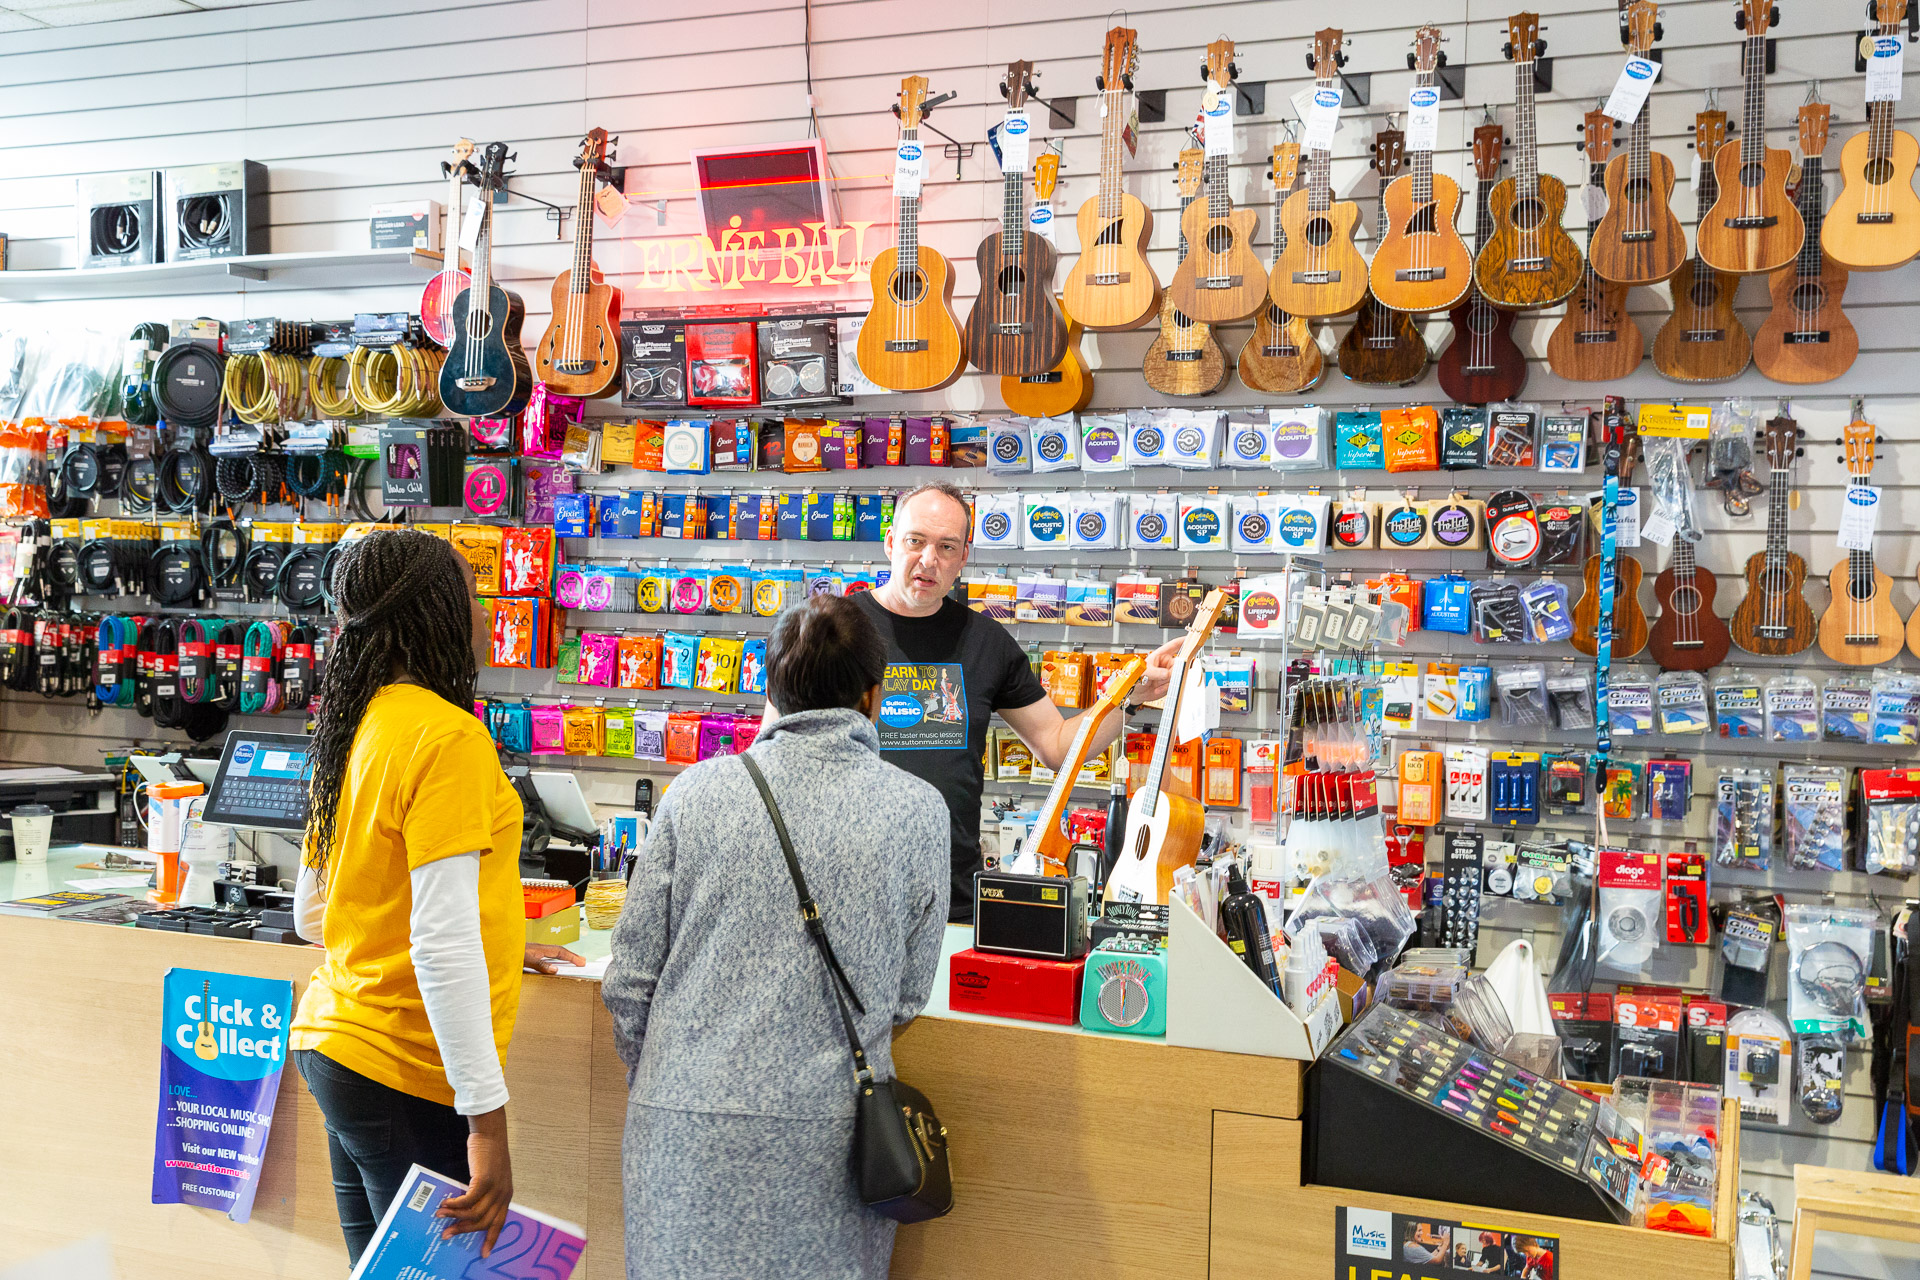 Customer buying a musical instrument